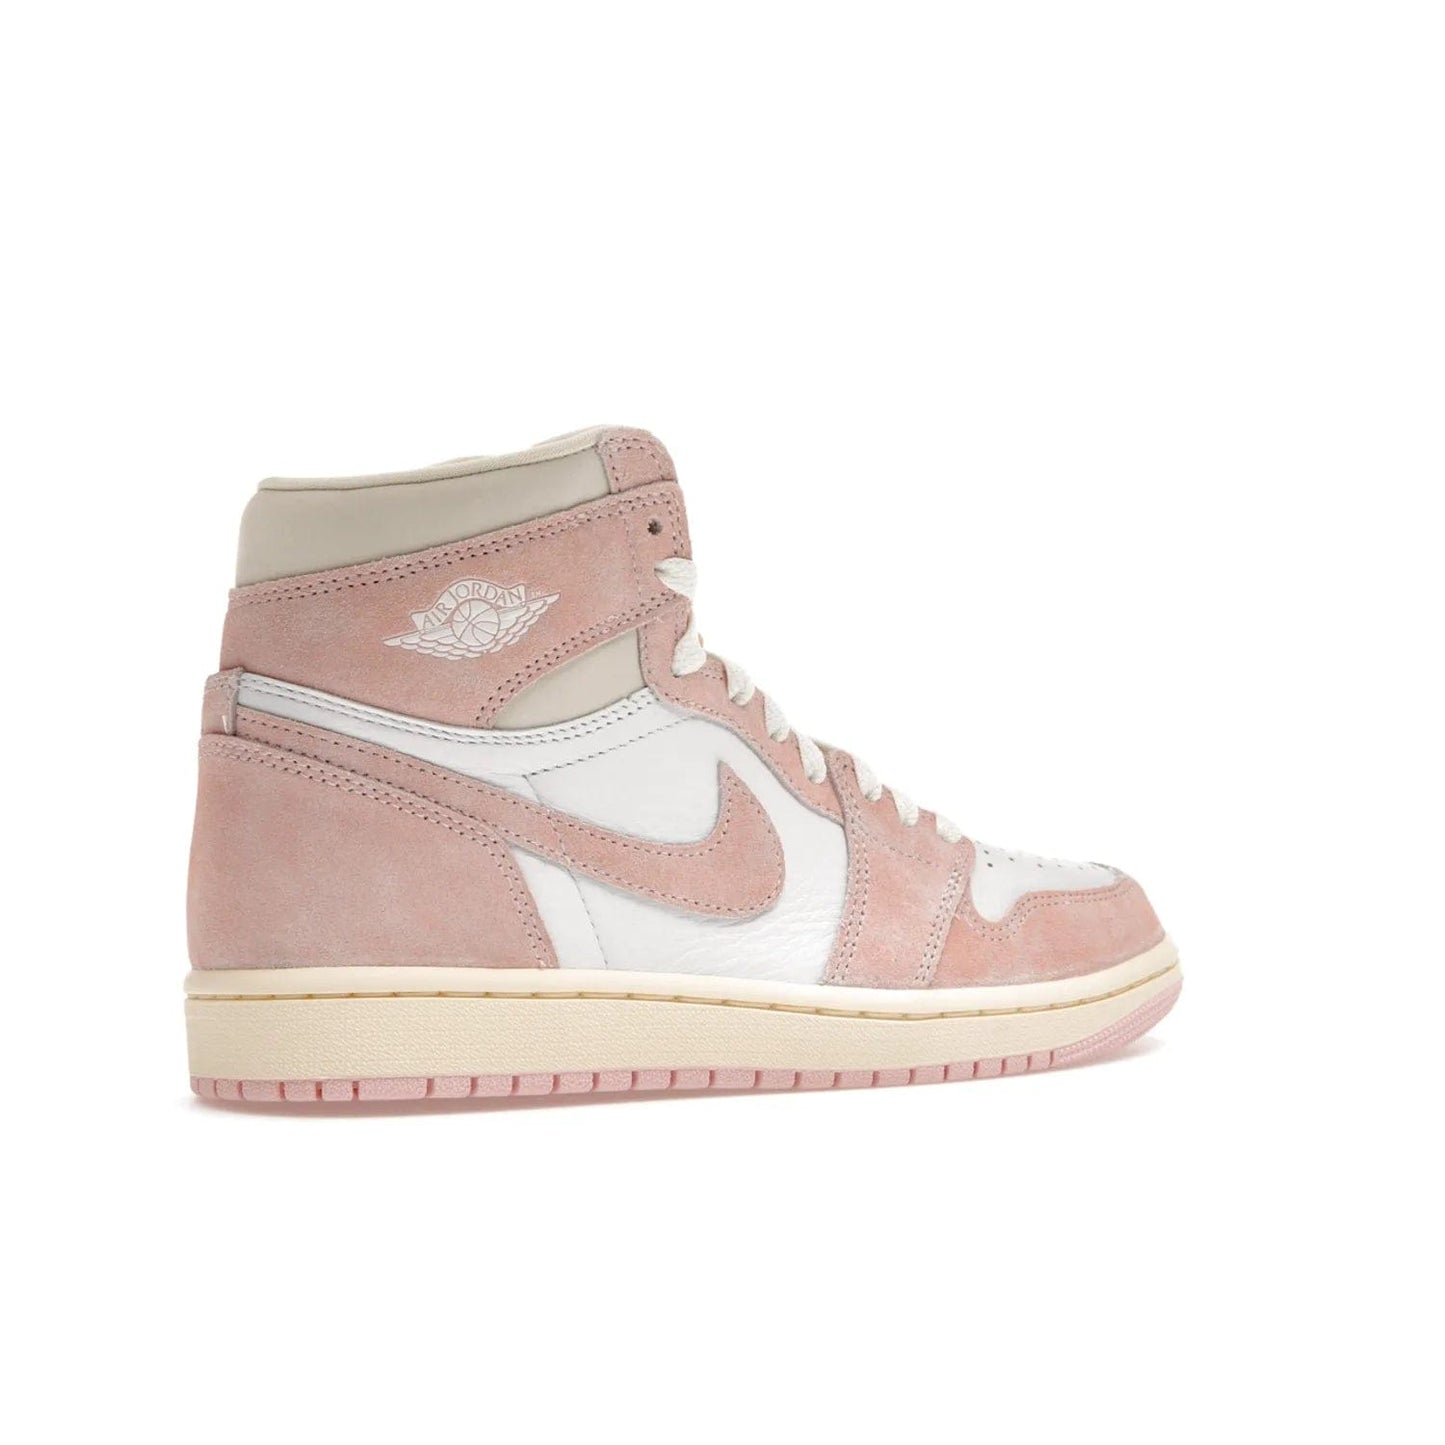 Jordan 1 Retro High OG Washed Pink (Women's) - Image 34 - Only at www.BallersClubKickz.com - Iconic Air Jordan 1 Retro High OG for women with unique pink suede and white leather uppers. Get the timeless look on April 22, 2023.